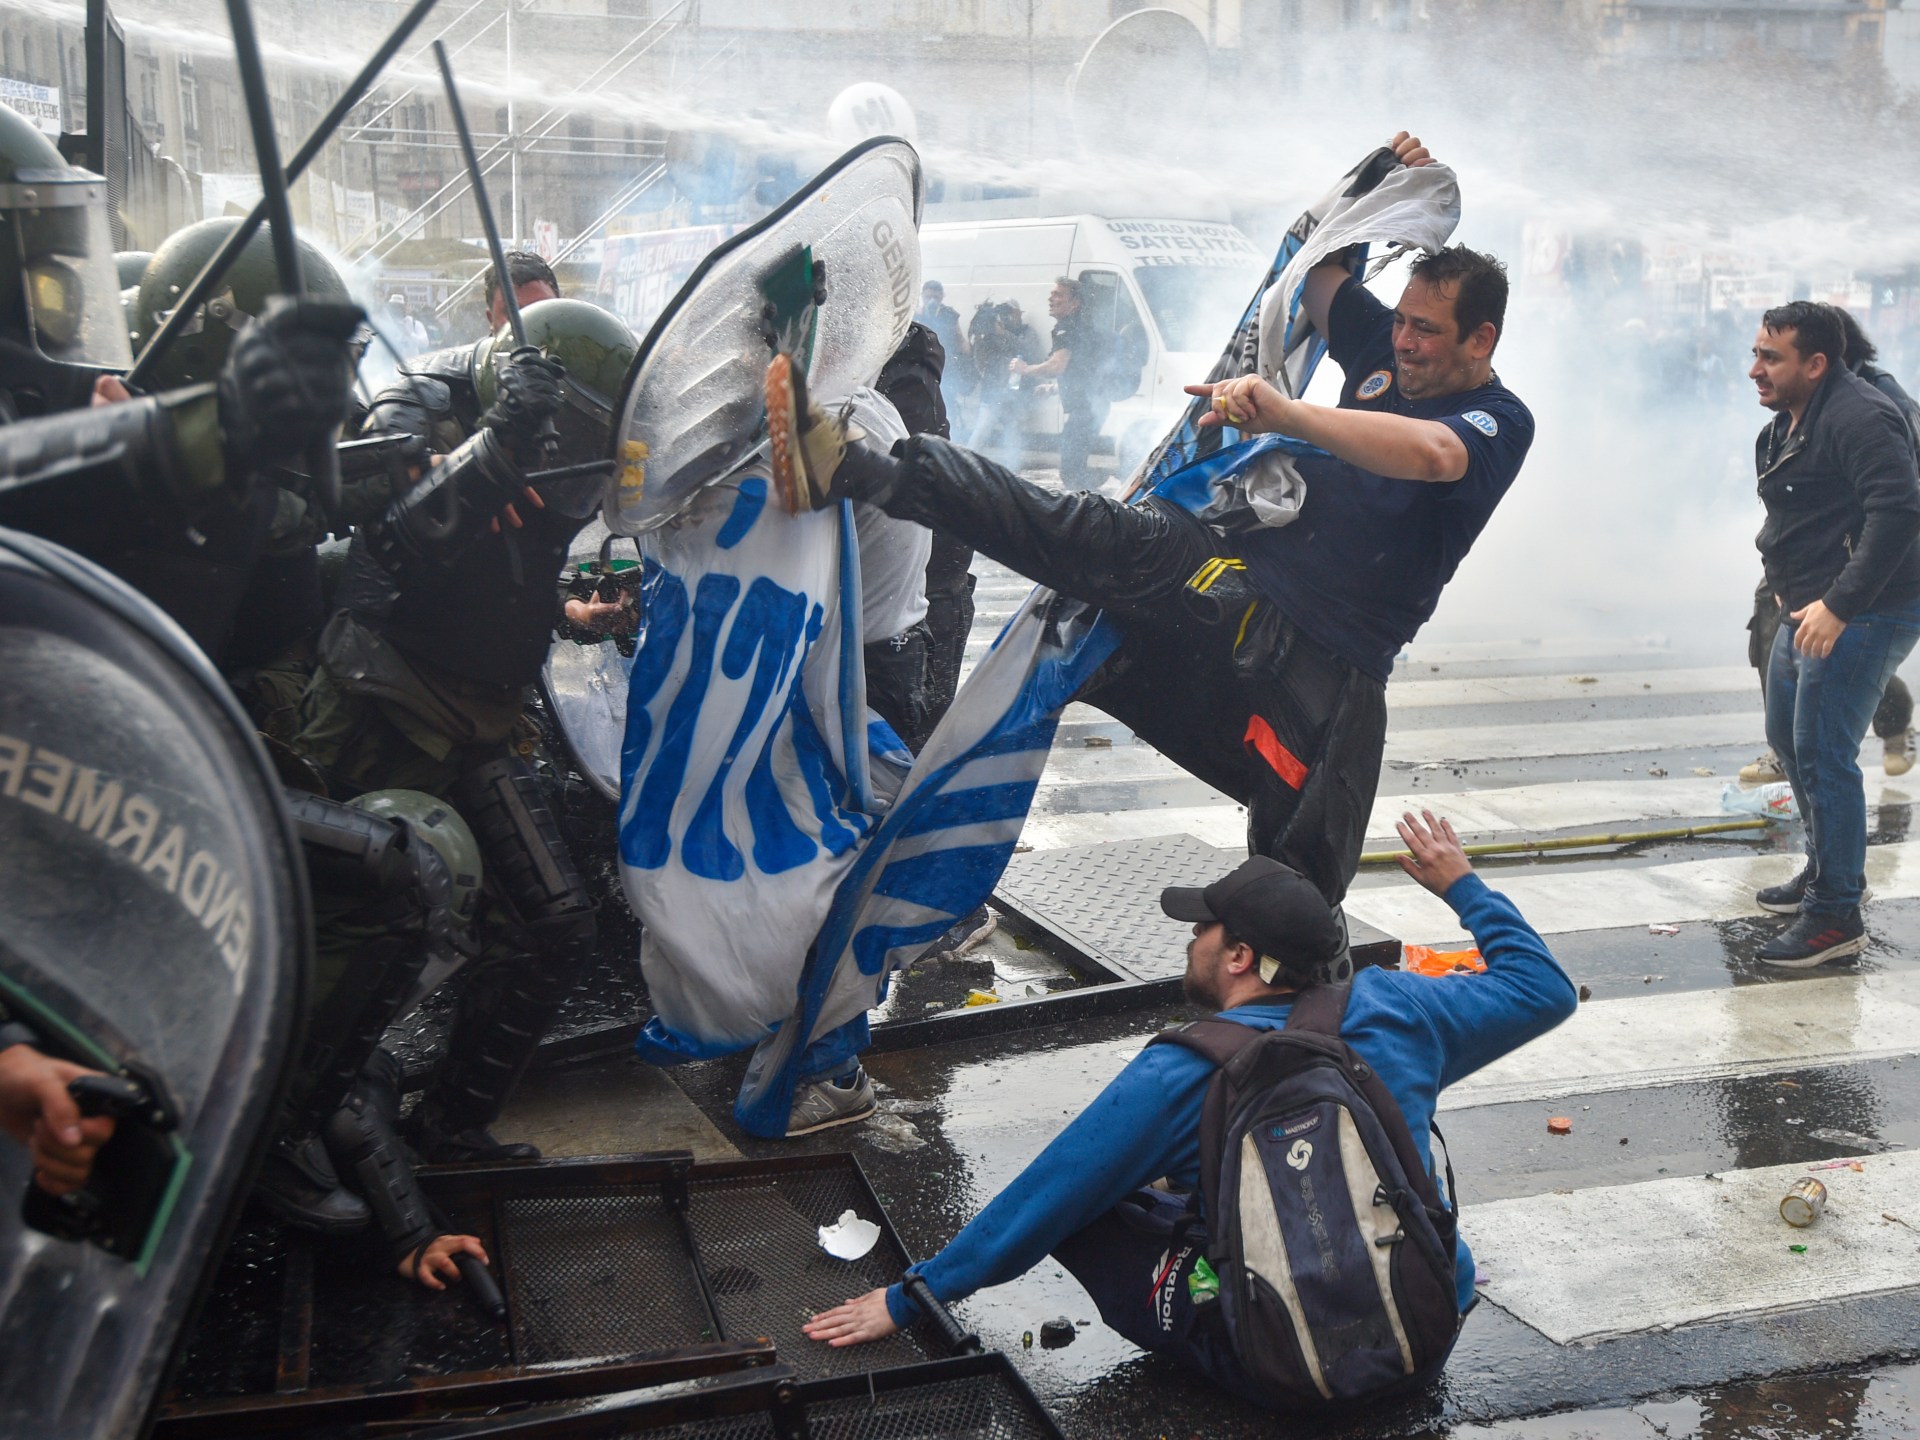 Clashes erupt between police and protesters as Argentina debates reform